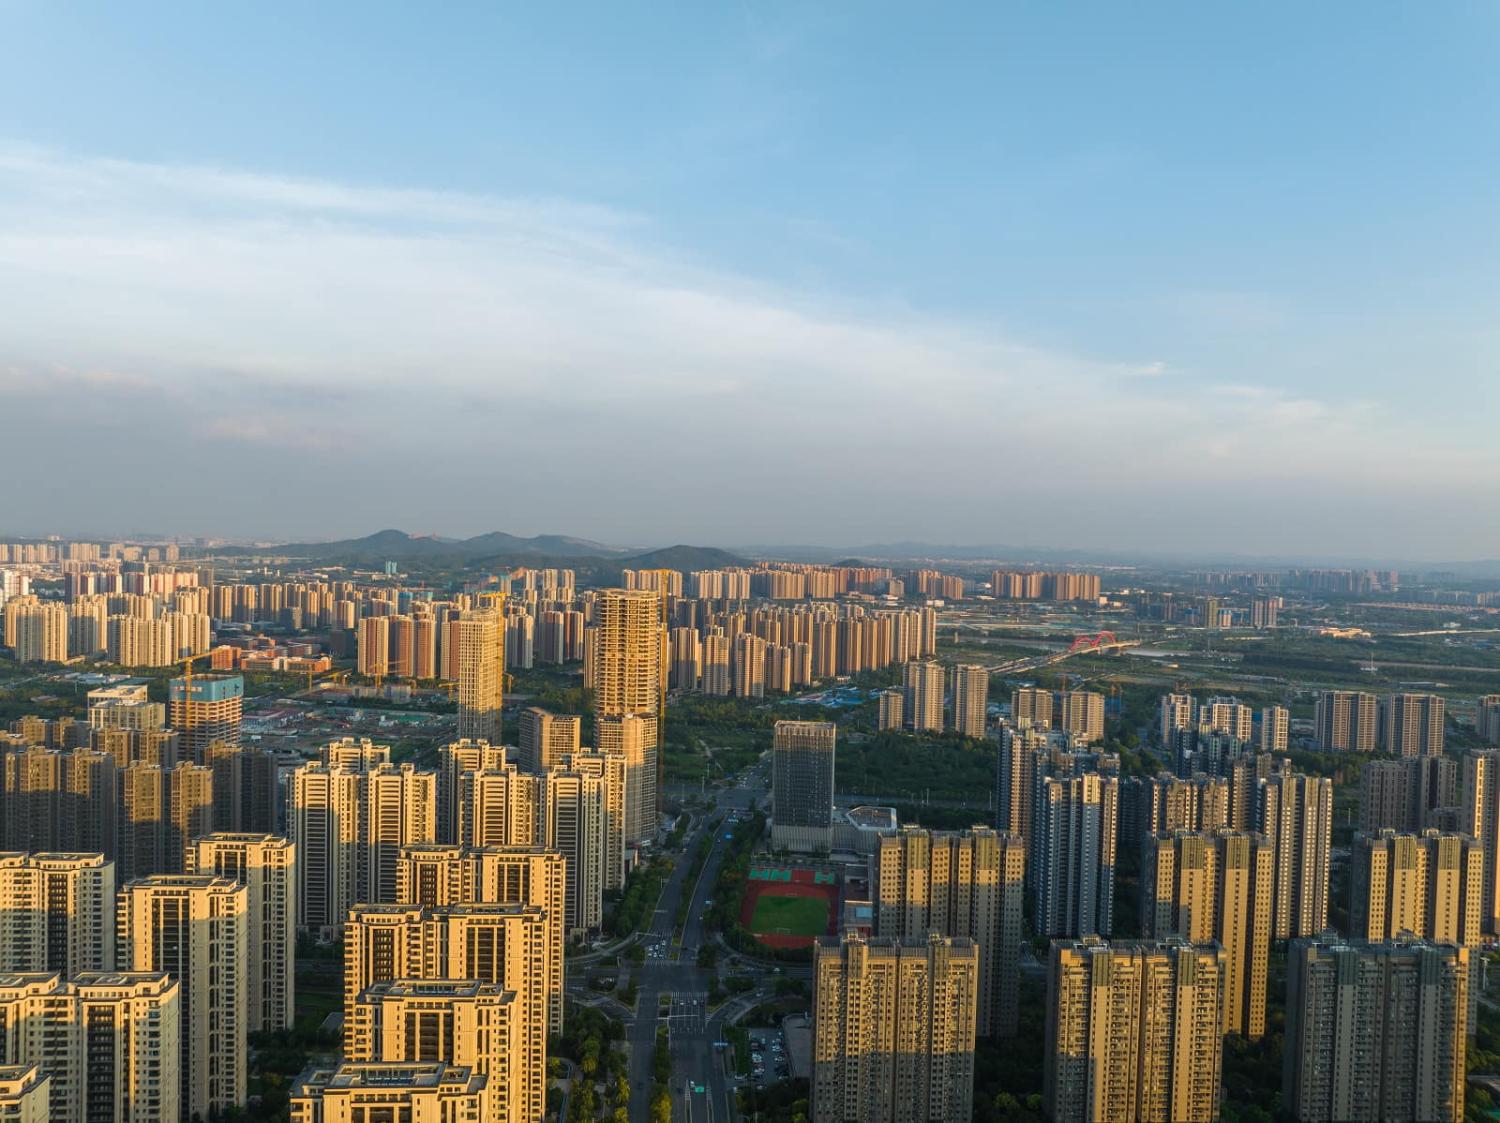 Efforts to resuscitate the flagging Chinese real estate market will further constrain provincial finances (Getty Images)